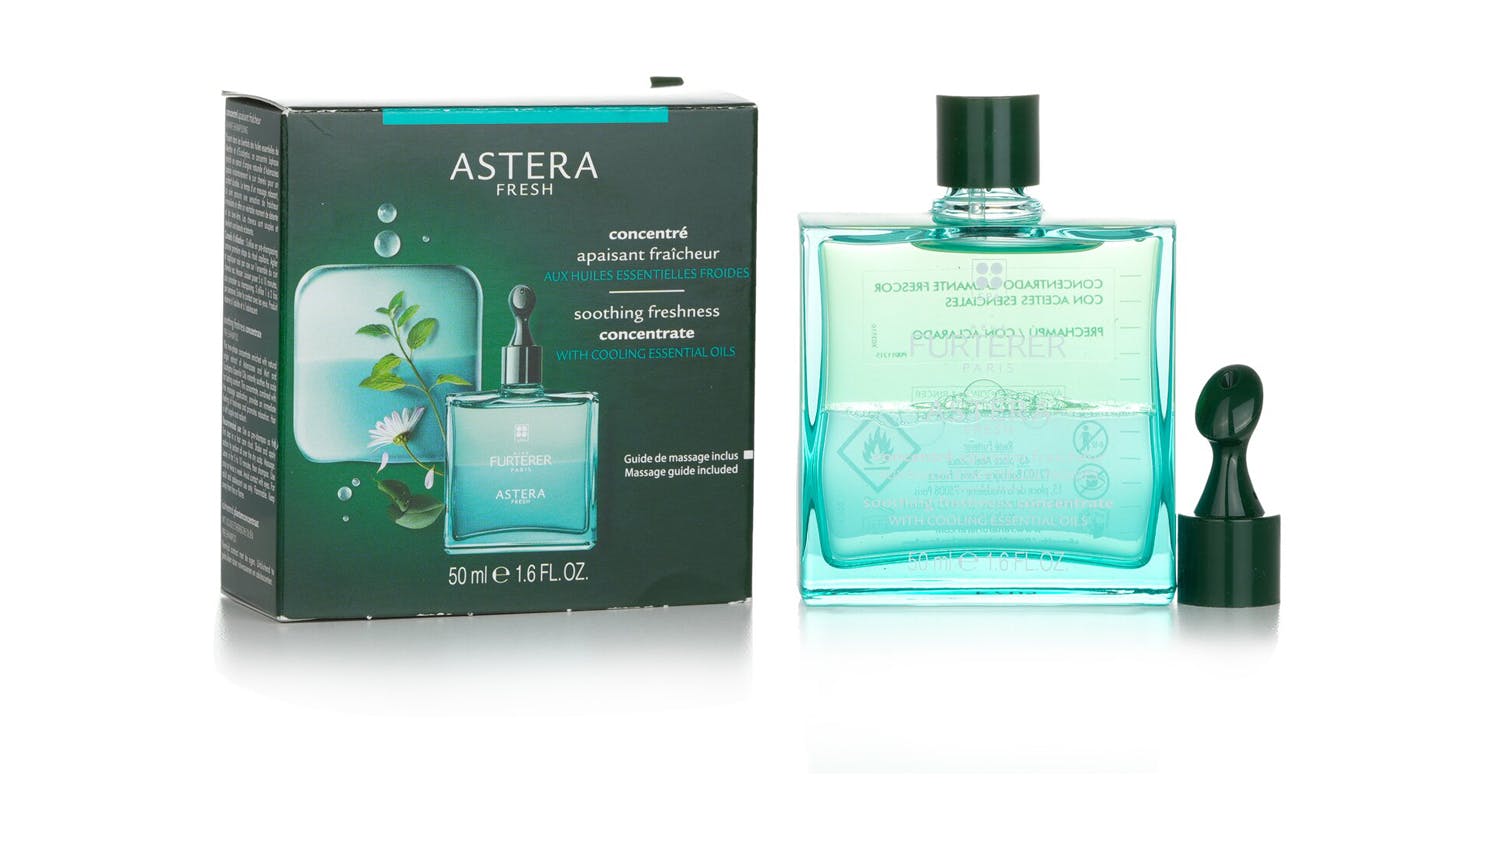 Astera Fresh Soothing Freshness Concentrate (Pre-Shampoo) - 50ml/1.6oz